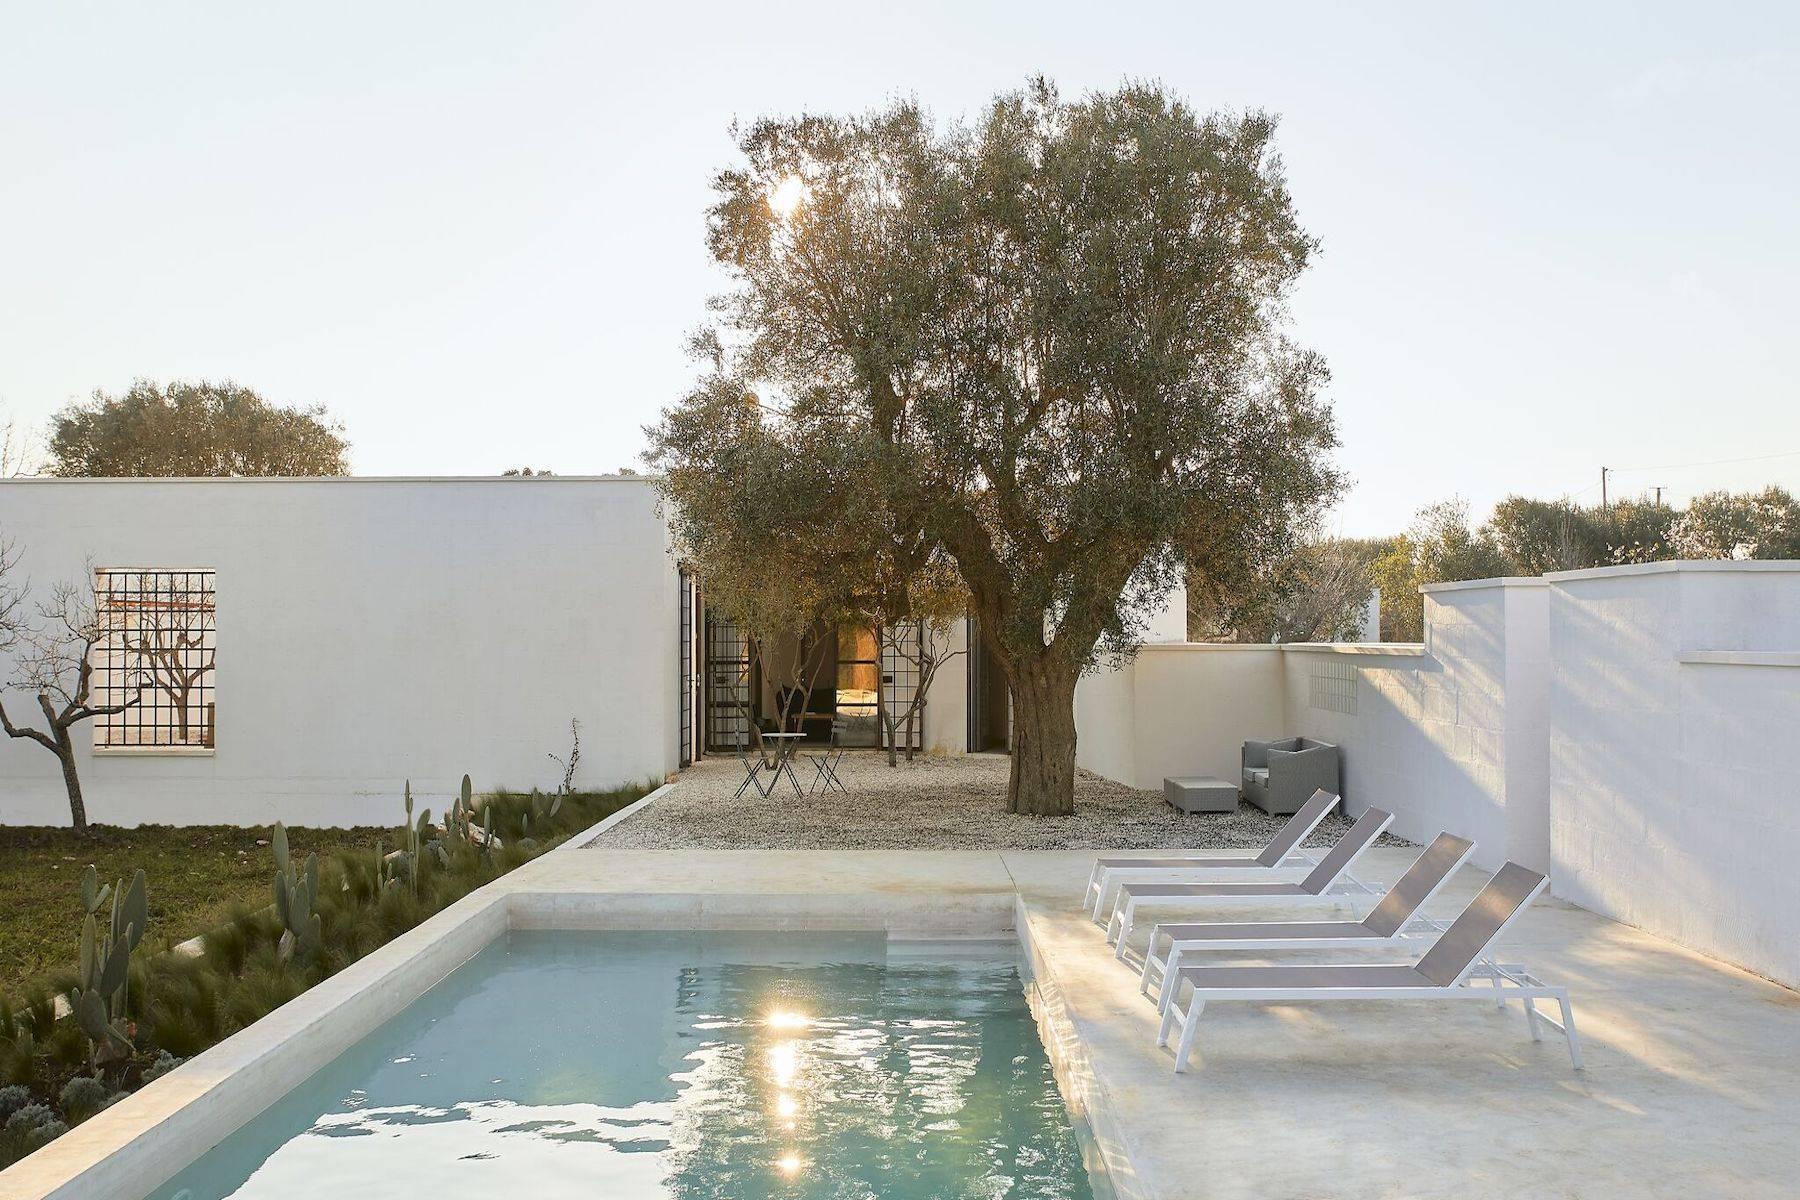 Casa Il Fico, traditional Apulian house surrounded by unspoiled nature - 1